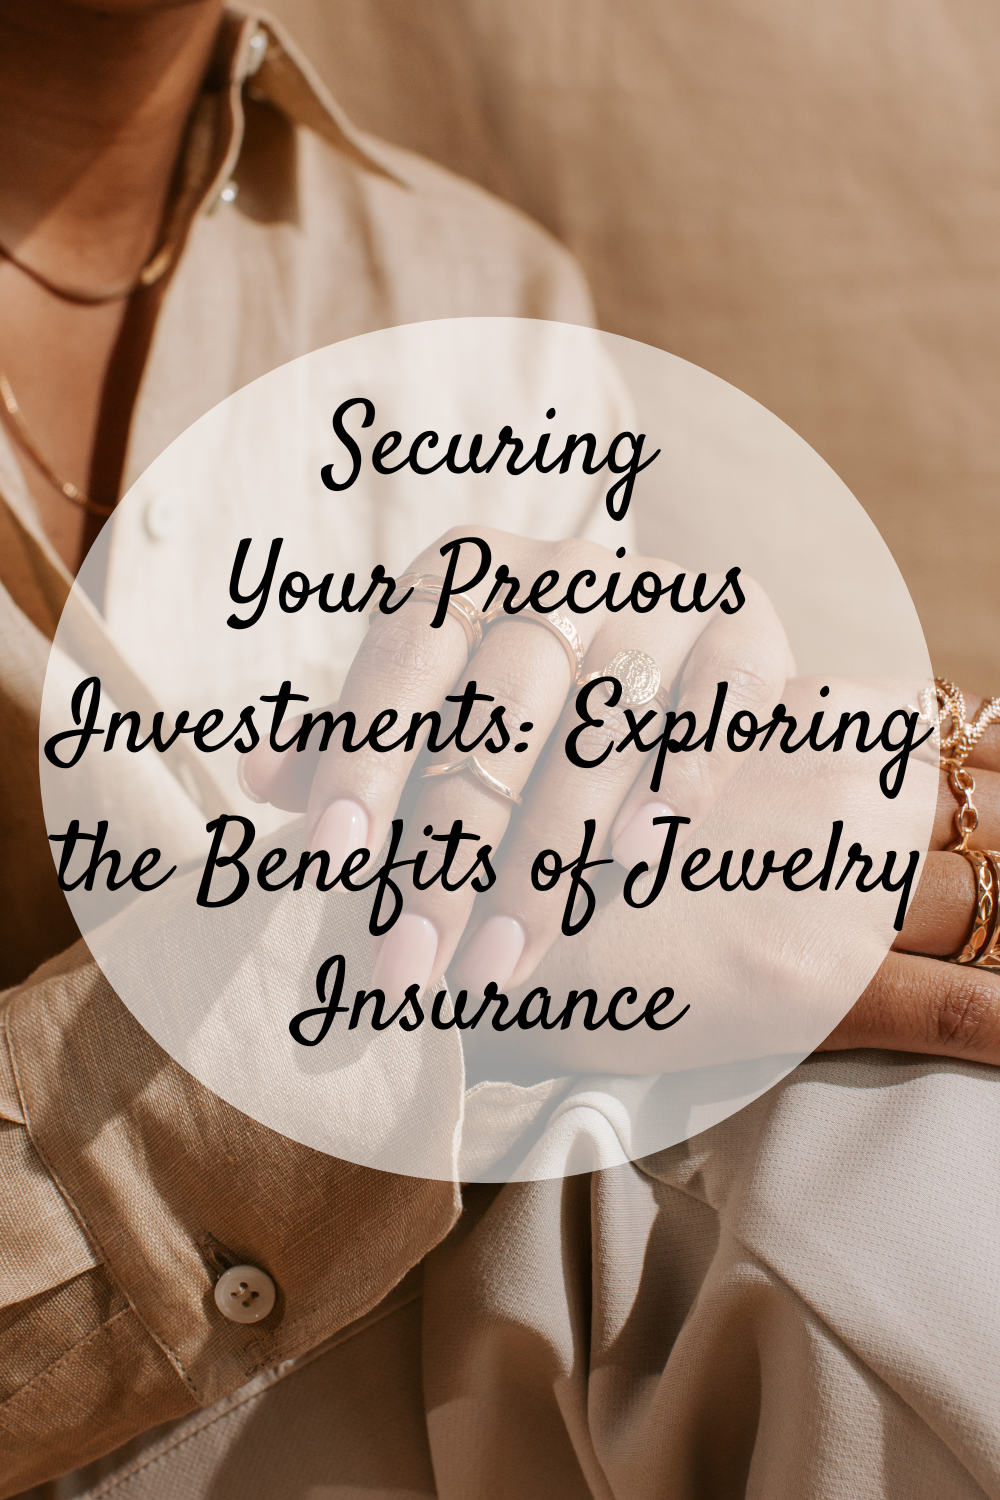 Securing Your Precious Investments: Exploring the Benefits of Jewelry Insurance